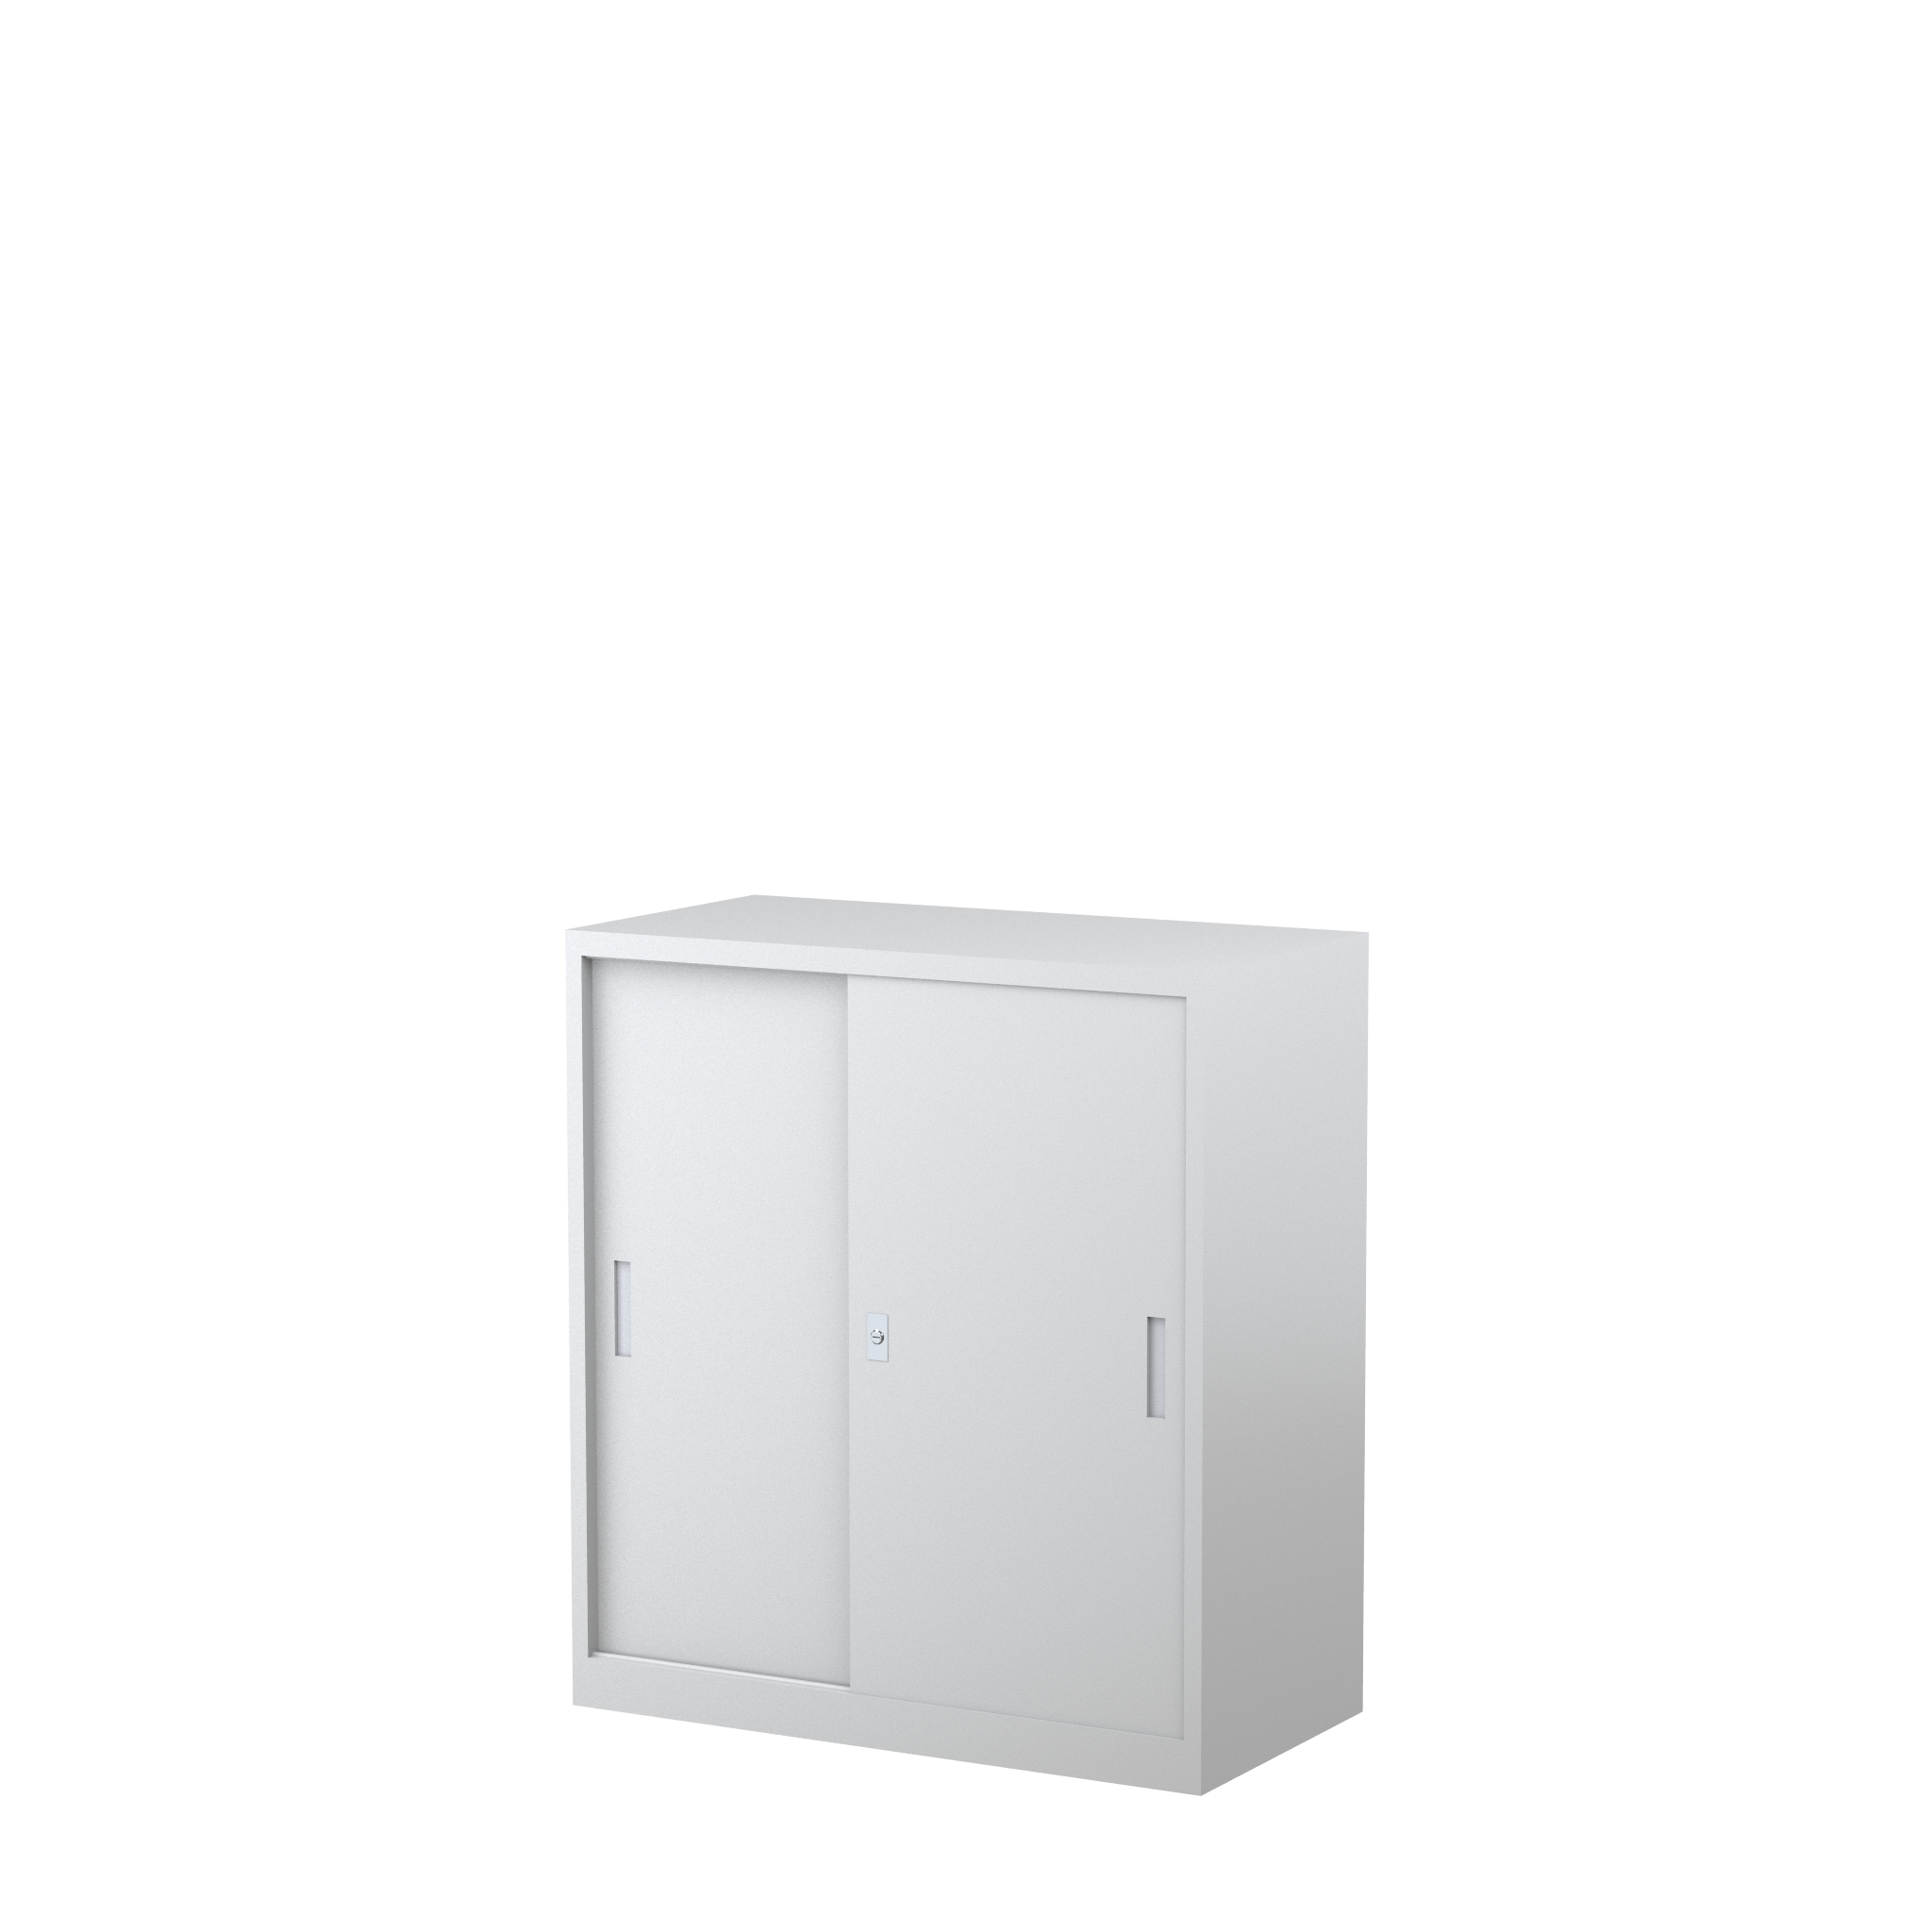 SD1015_914 - STEELCO SS Cabinet 1015H x 914W x 465D - 2 Shelves-WS.png